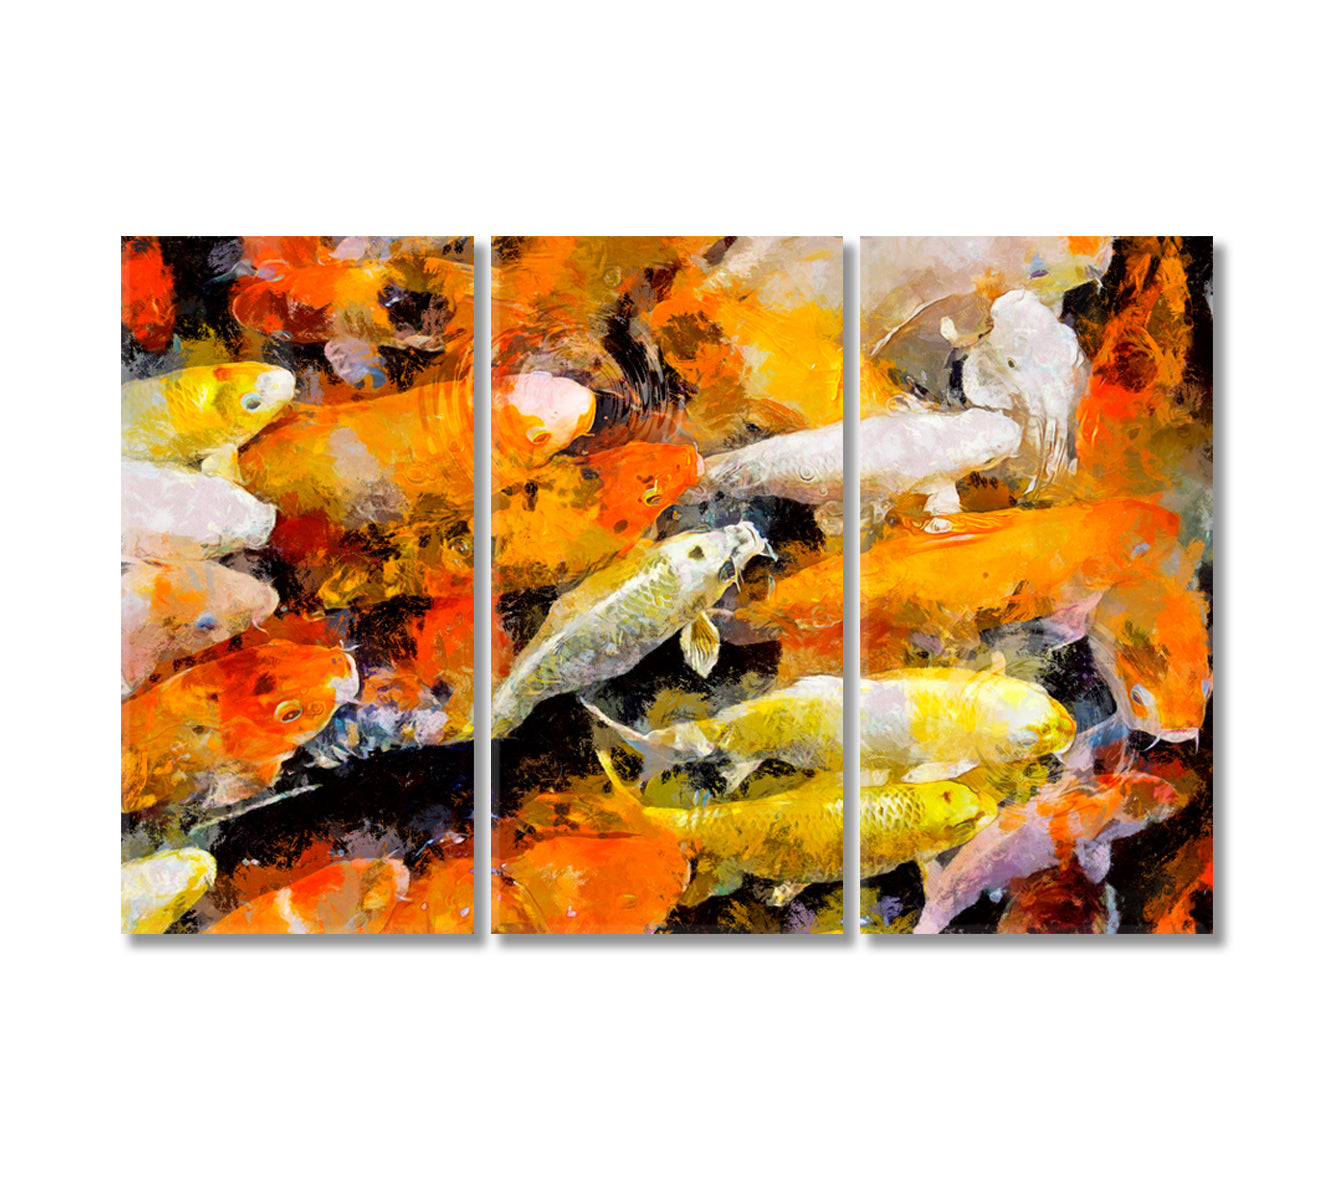 Japanese Koi Fishes Art For Home-Canvas Print-CetArt-3 Panels-36x24 inches-CetArt